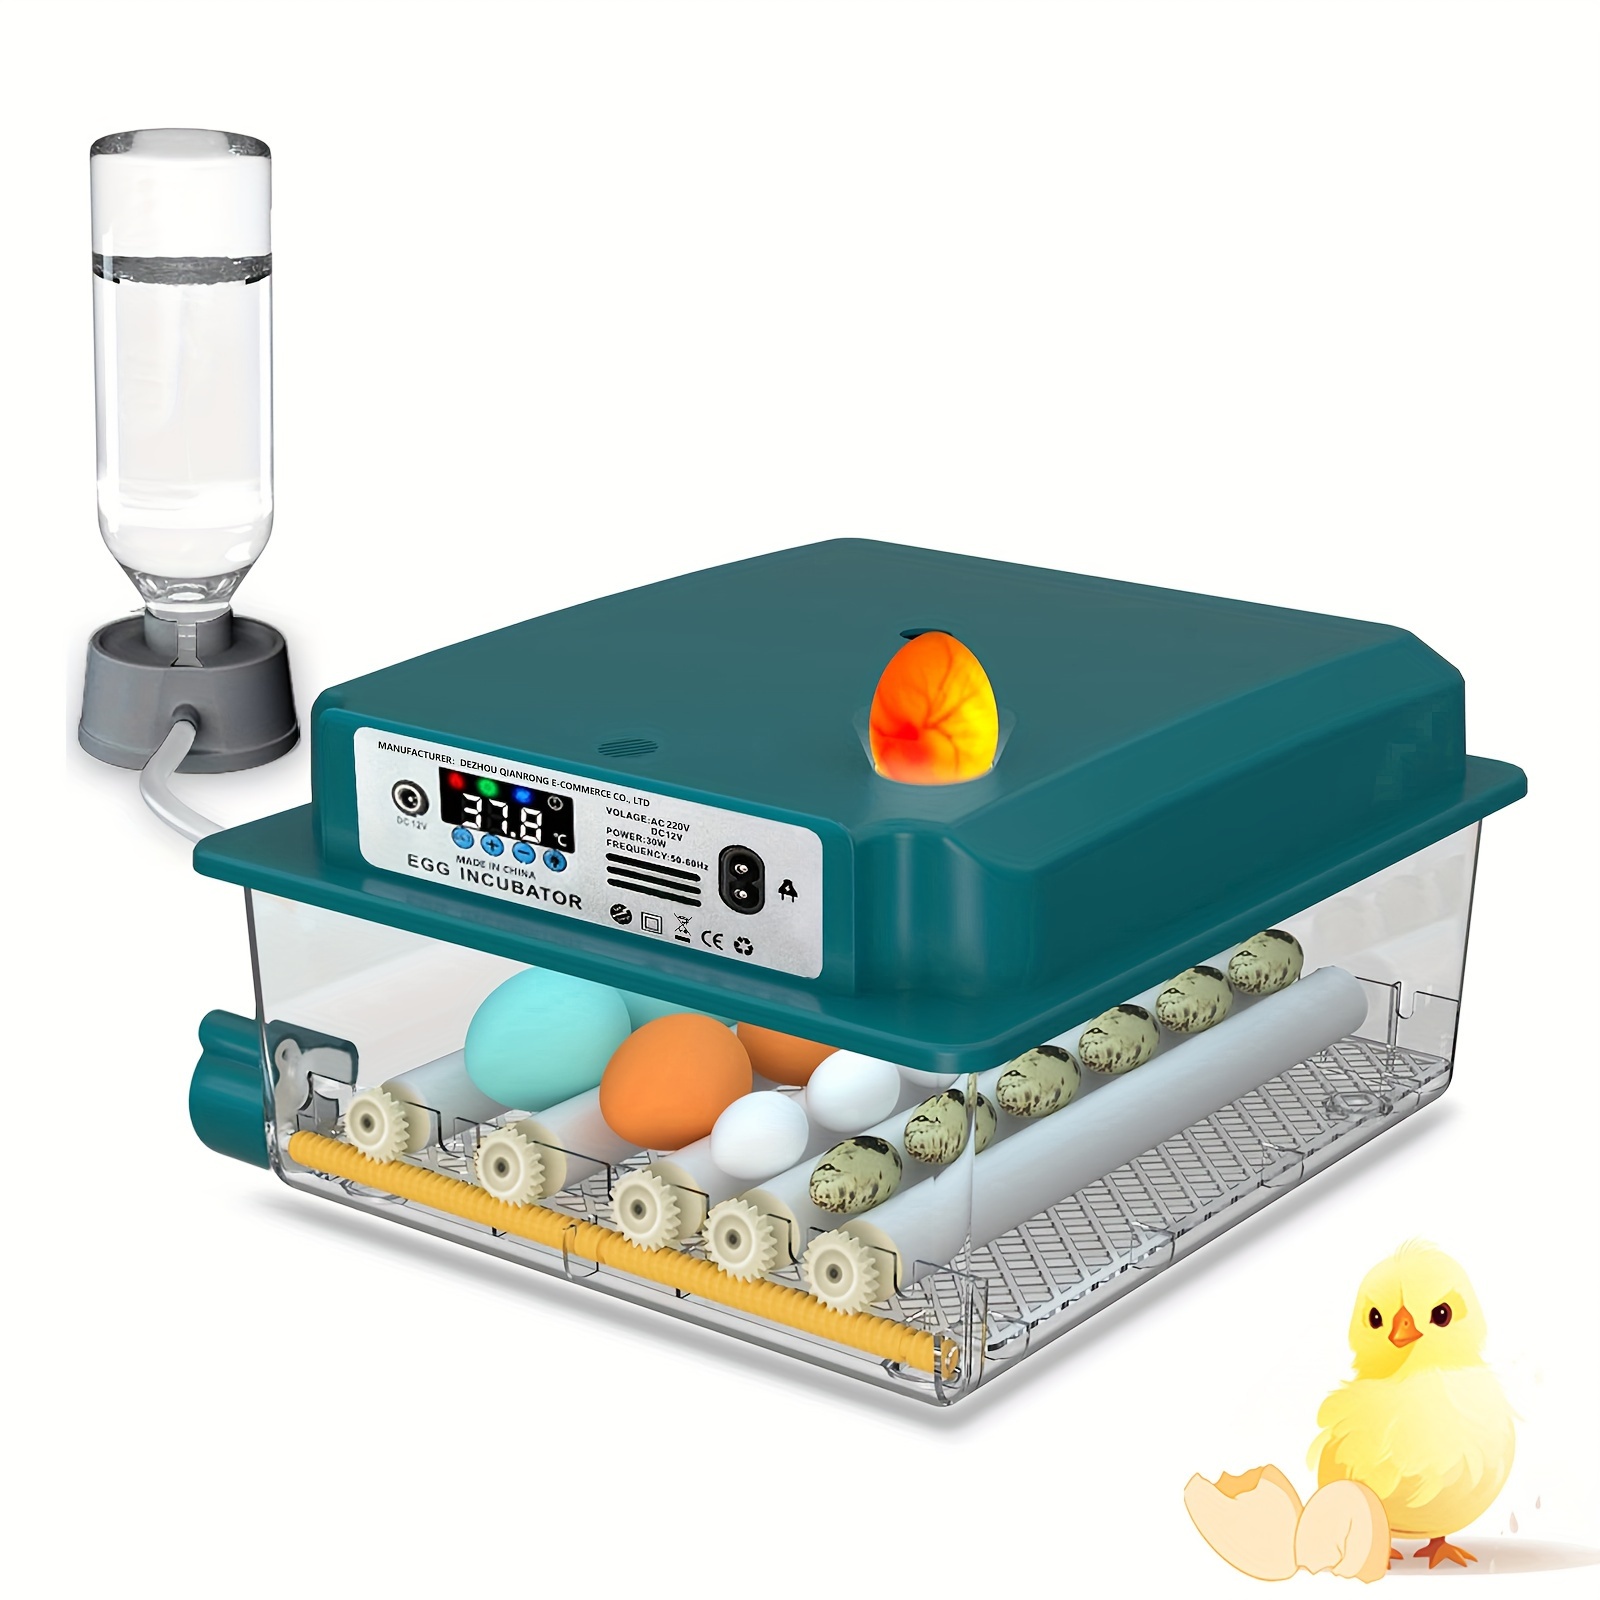 

16 Eggs Incubator, Incubator For Chicken Eggs, With Automatic Humidification&egg Turning, Quail Egg Incubator, Incubator With Egg Candler, For Duck Eggs